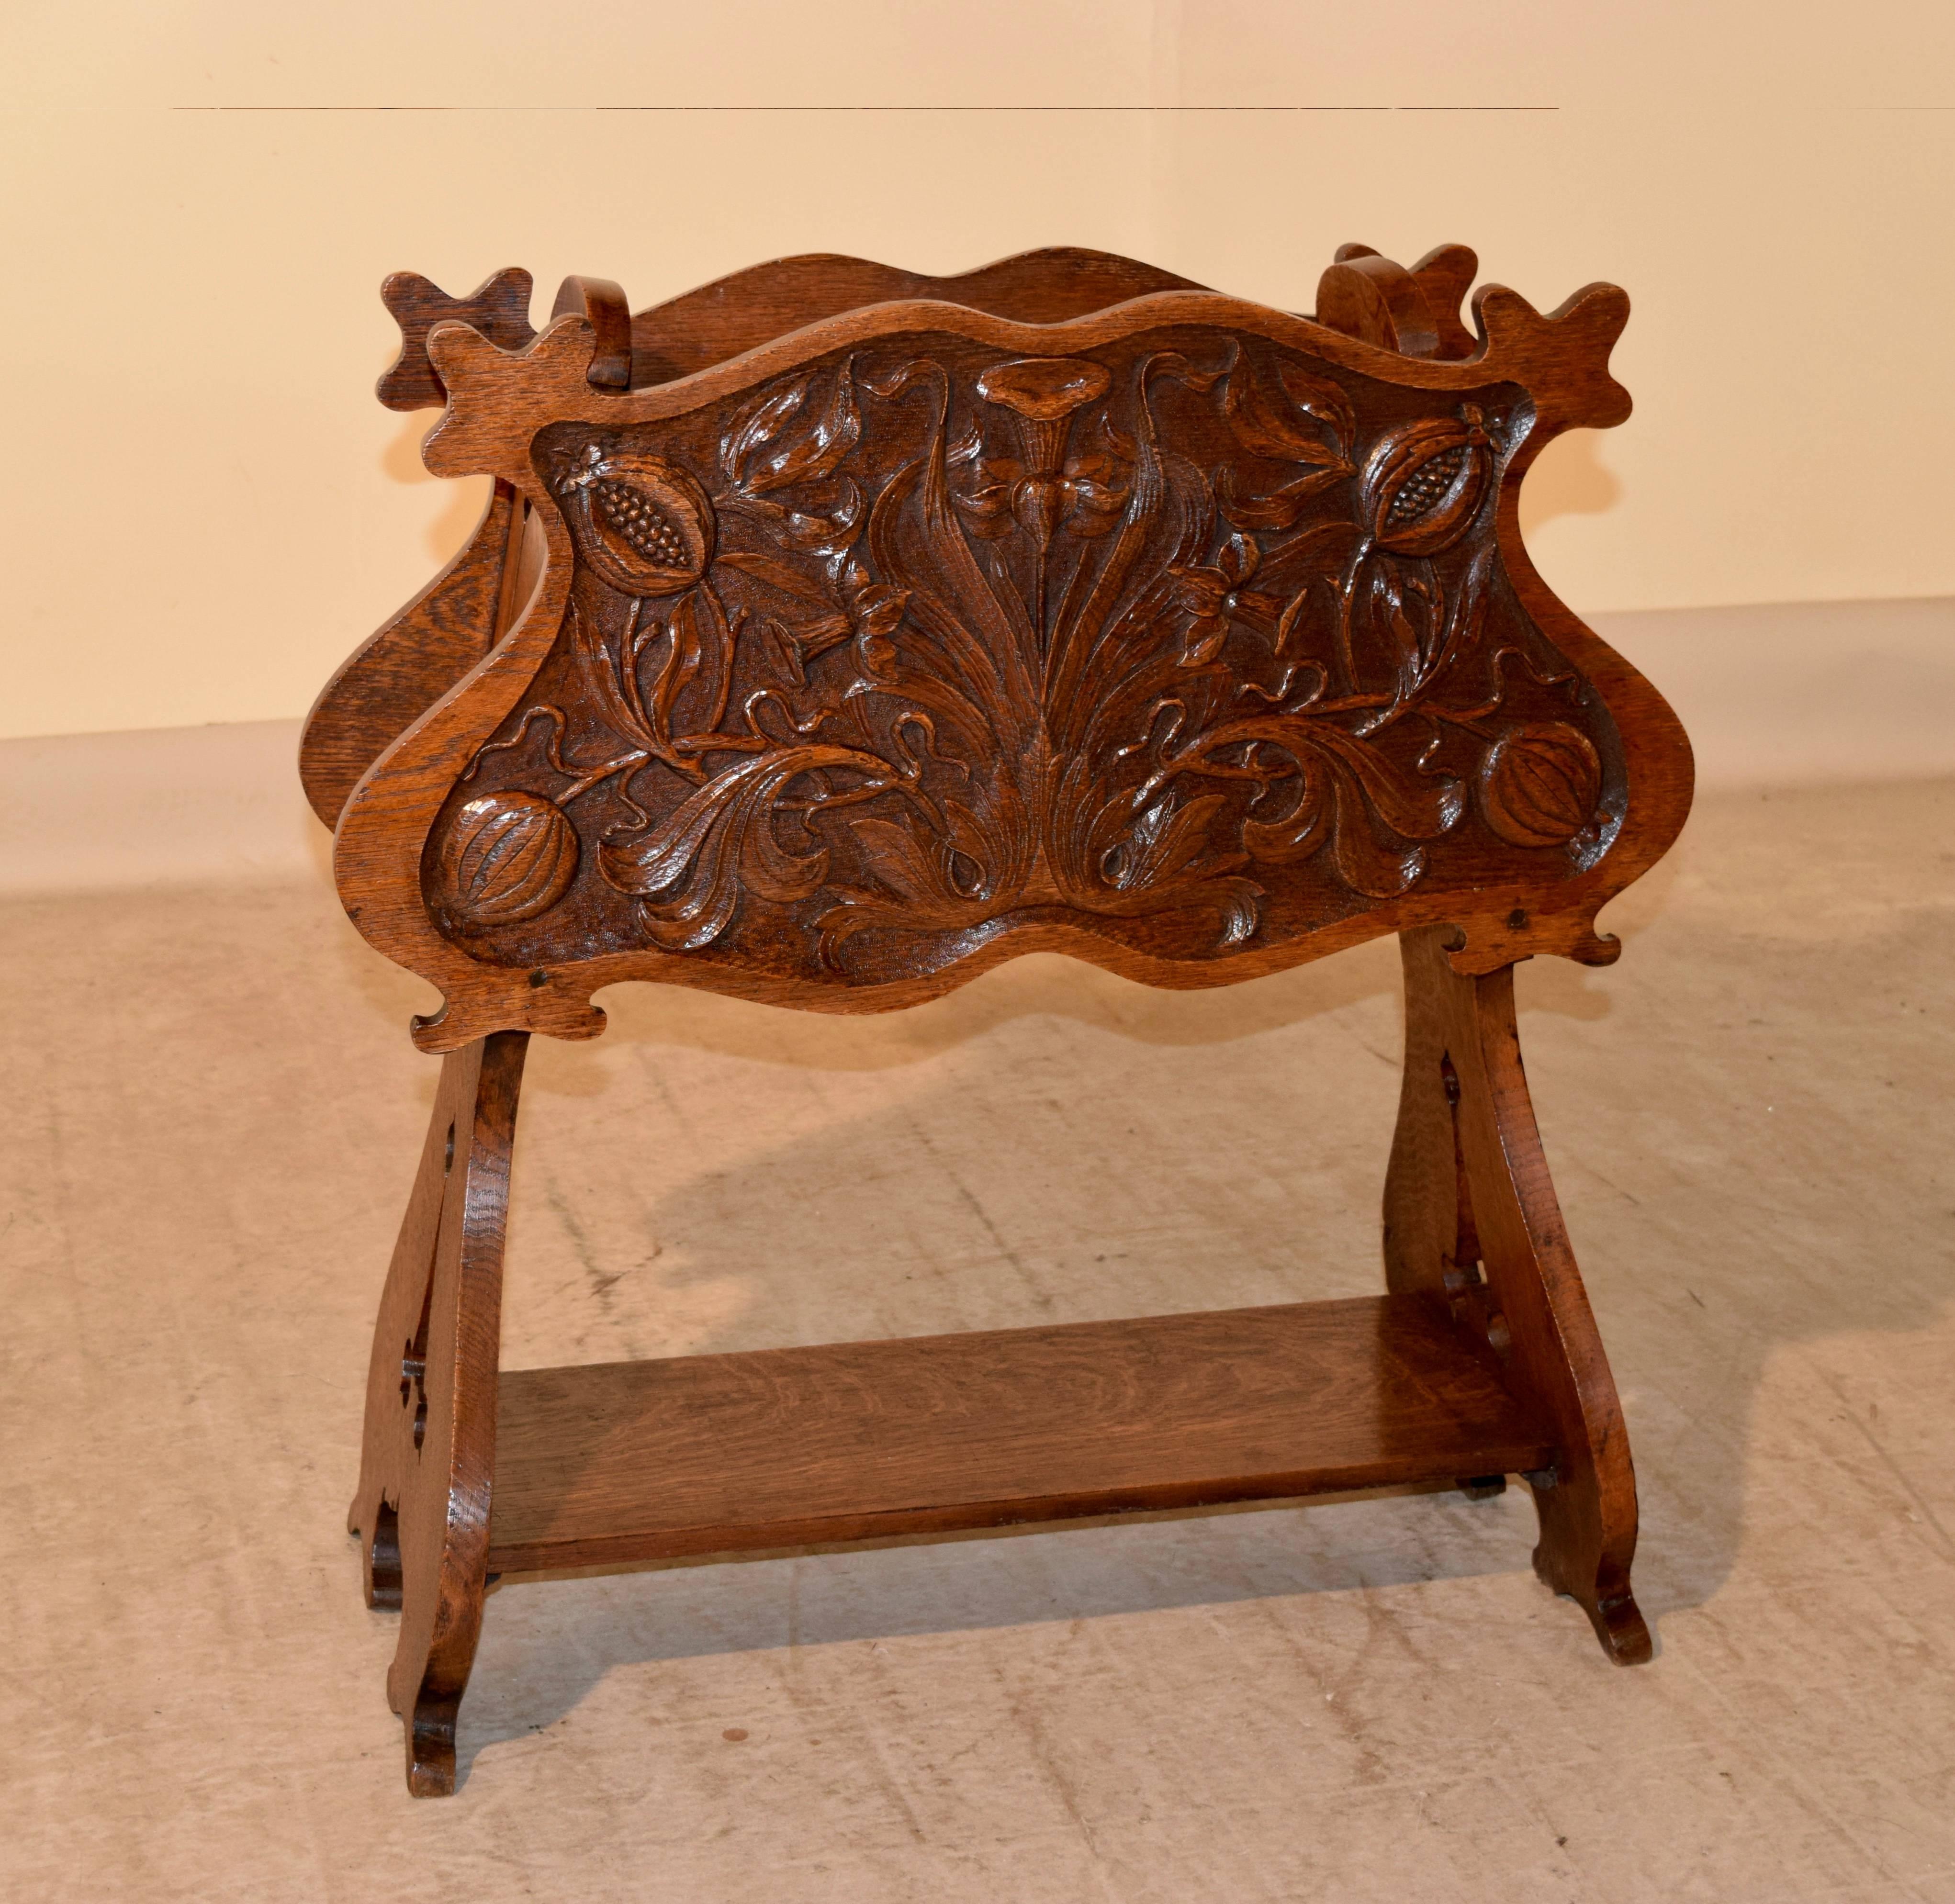 19th century French magazine rack made from oak. The front and back panels are fabulously hand carved with wonderful floral patterns, and are shaped as well. There are two central sections inside for magazines or papers. The sides are pierced and